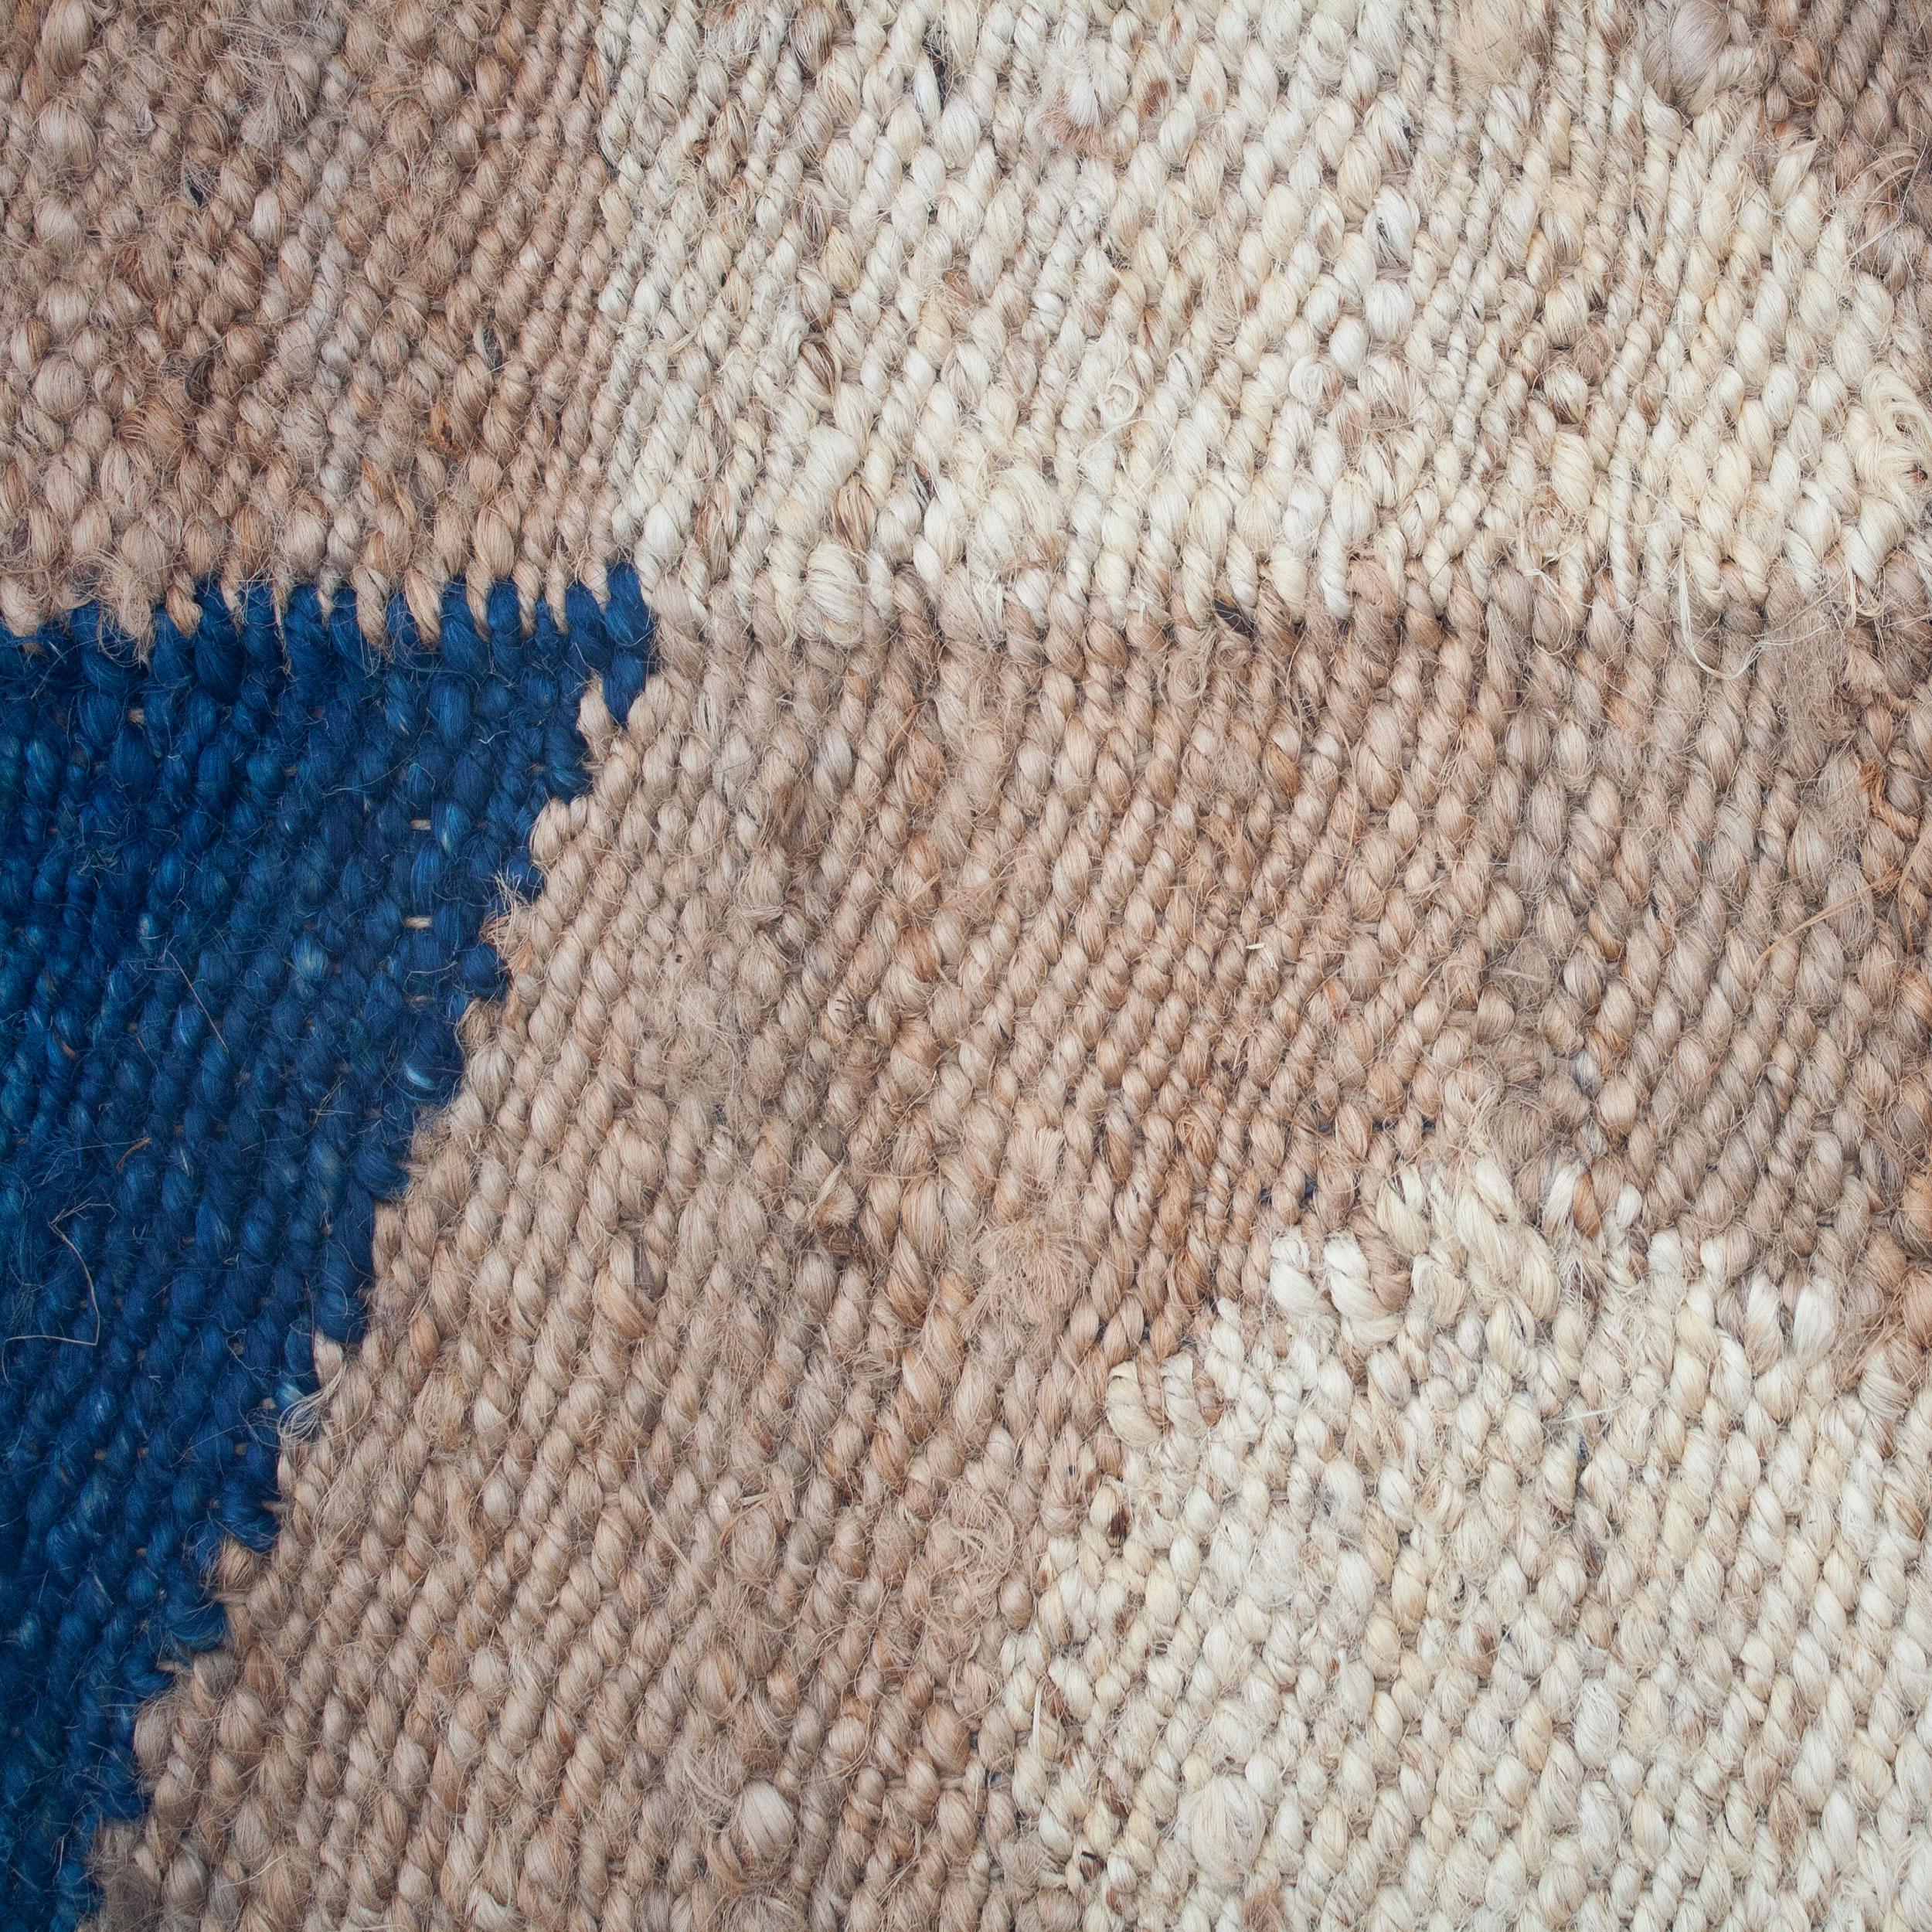 This jute rug has been ethically hand woven in the finest jute yarns by artisans in Rajasthan, India, using a traditional weaving technique which is native to this region.

The purchase of this handcrafted rug helps to support the artisans and